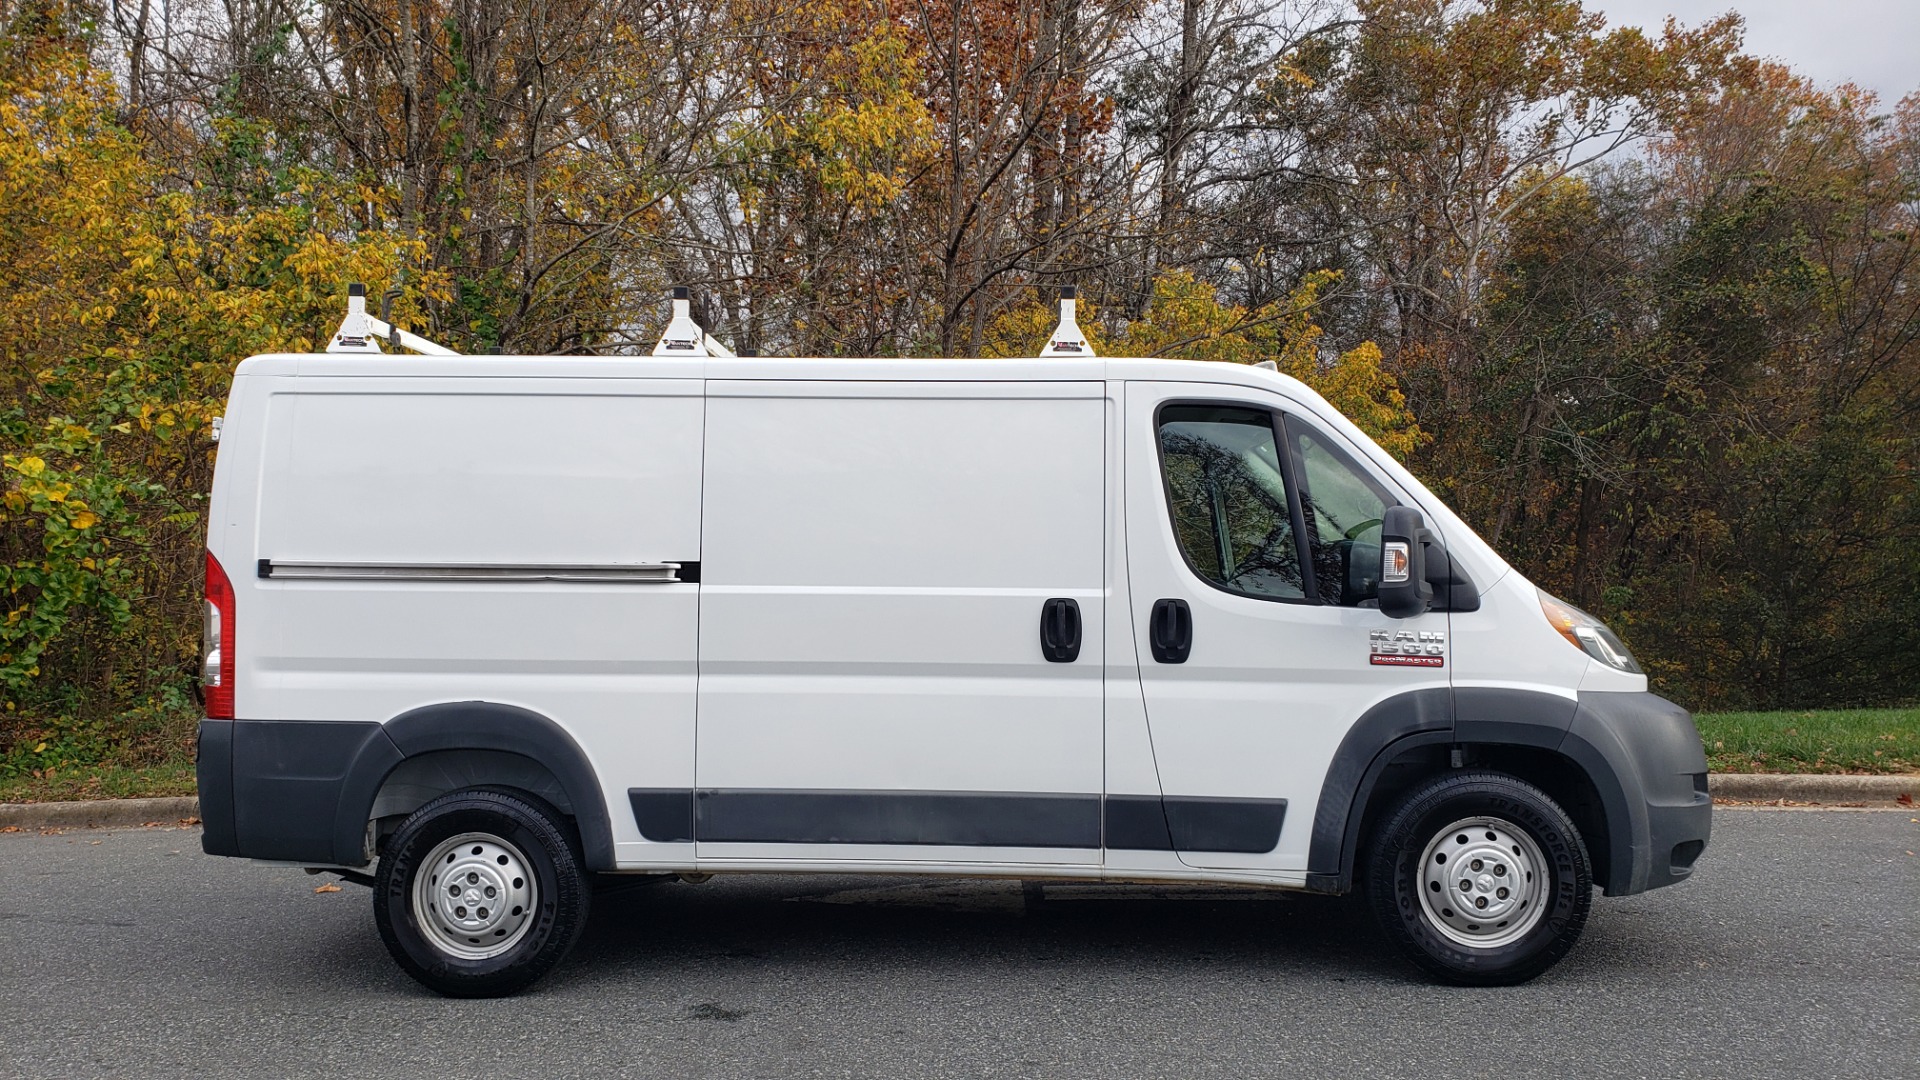 Used 2015 Ram PROMASTER CARGO VAN 136-INCH WB / LOW ROOF / LADDER RACK / INSIDE RACKS for sale Sold at Formula Imports in Charlotte NC 28227 5